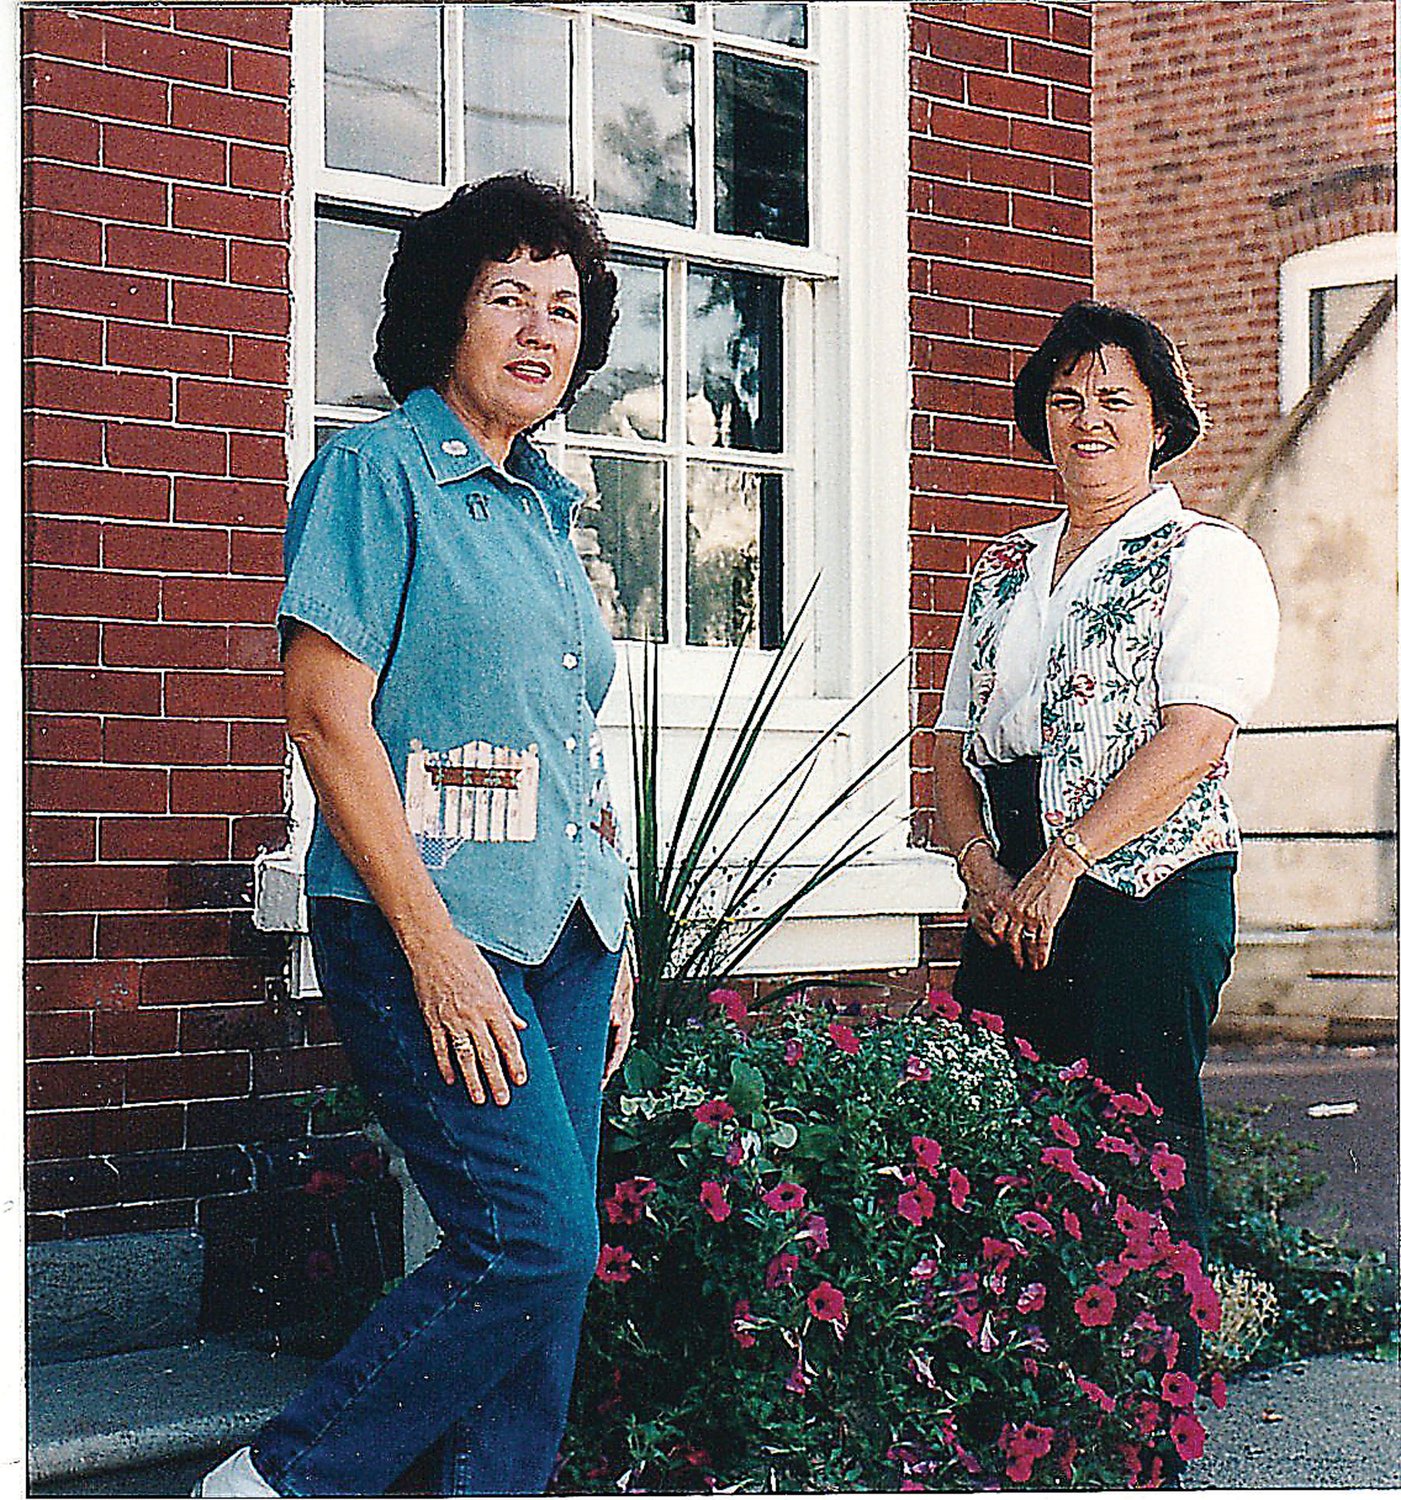 Elsie Bartram and Linda List were photographed, as part of an article in the Perkasie News-Herald when the Perkasie Garden Club was awarded second place for planters in the Community Container Garden Category of the Bucks Beautiful 1997 Summer Competition. Elsie was president of the club and Linda was the club member who spearheaded the planters project, their installation and planting.